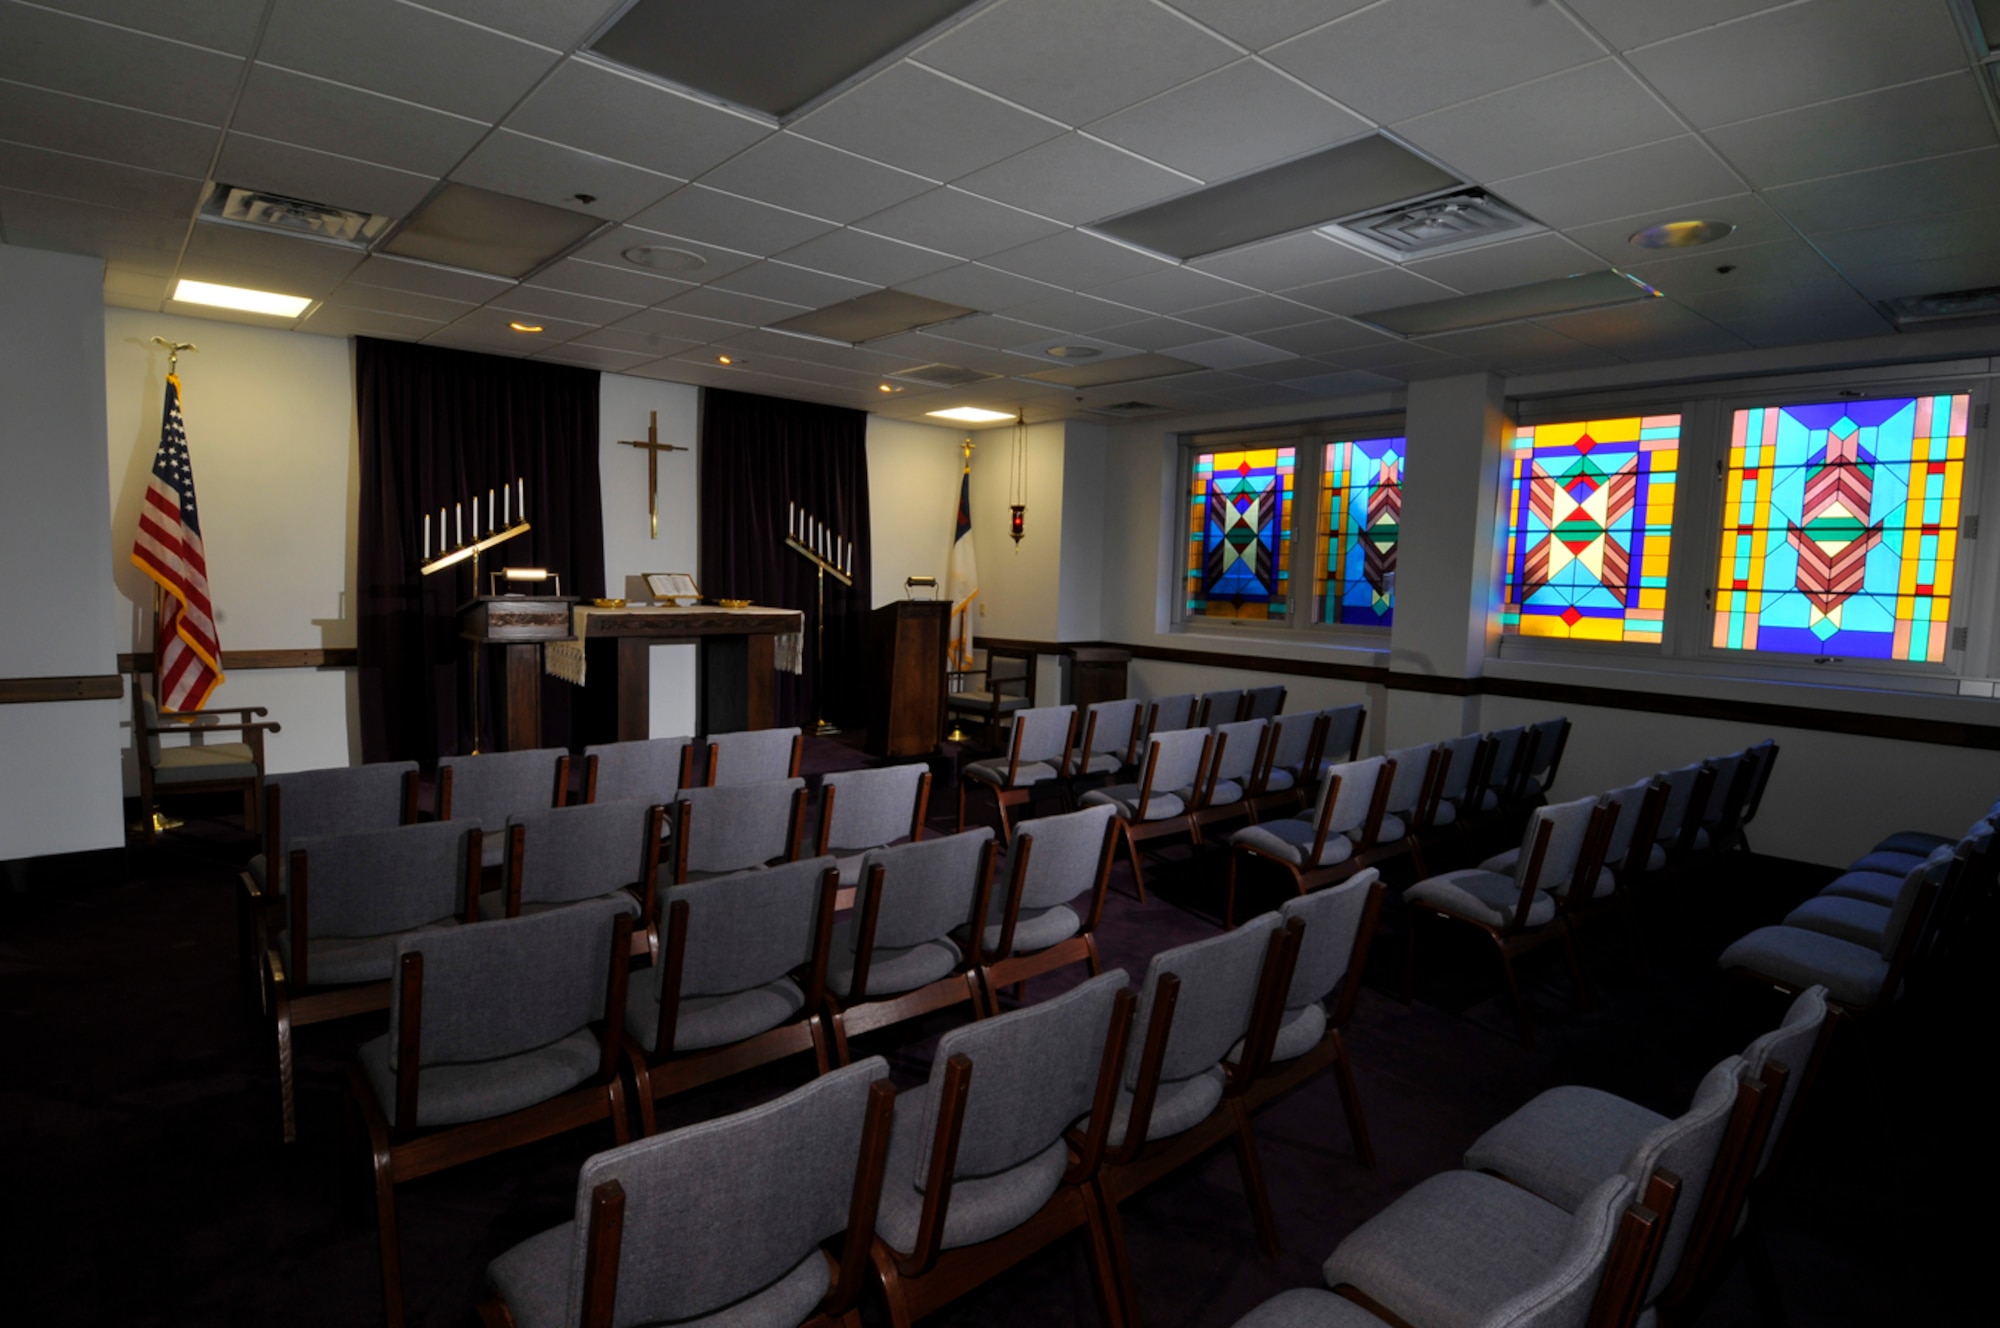 The AEDC chapel in the A&E Building provides a quiet environment for prayer or reflection 24/7. (Photo by Rick Goodfriend)